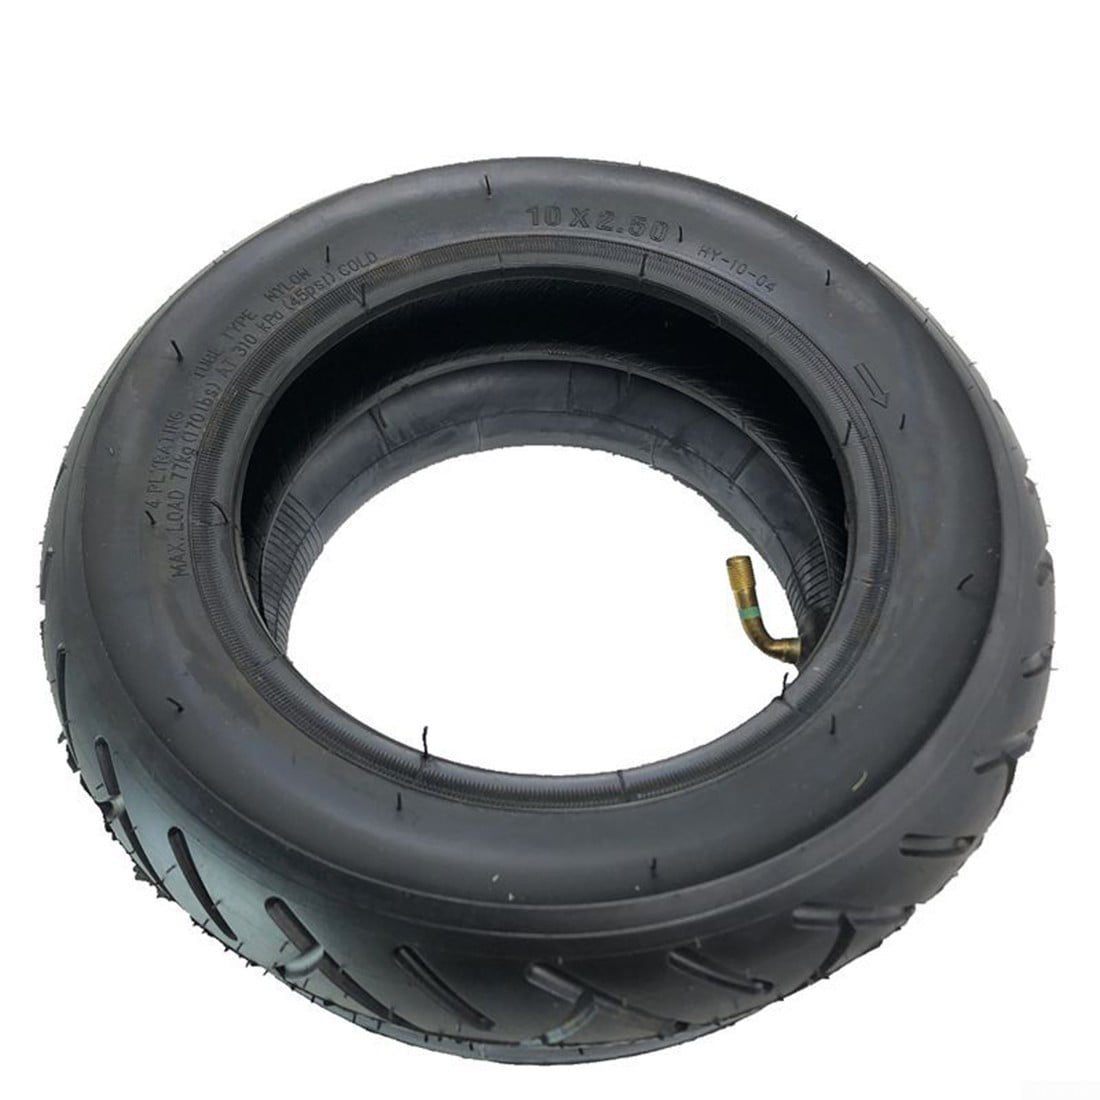 Electric Scooter 10x2.5 Inch Inner Tube & Tire Tyre Black Durable Thick Rubber 